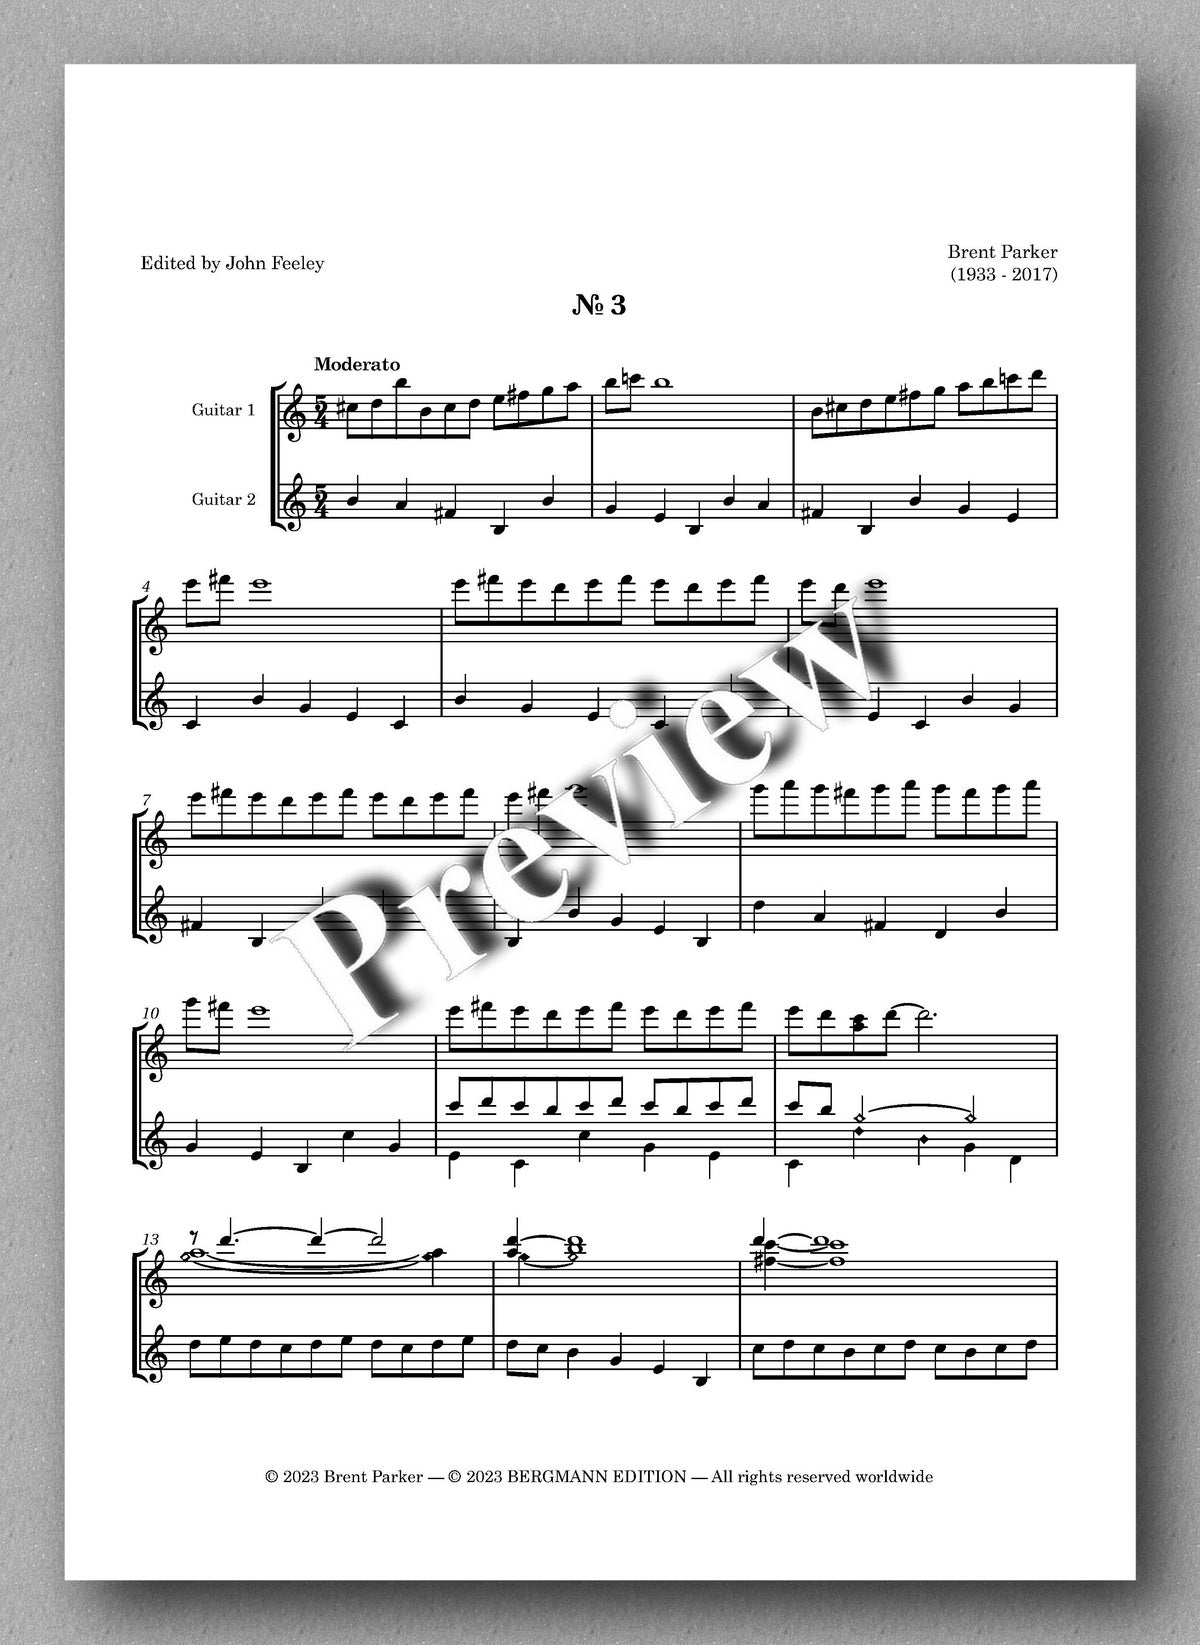 Five Spanish Pieces by Brent Parker - preview of the music score 3